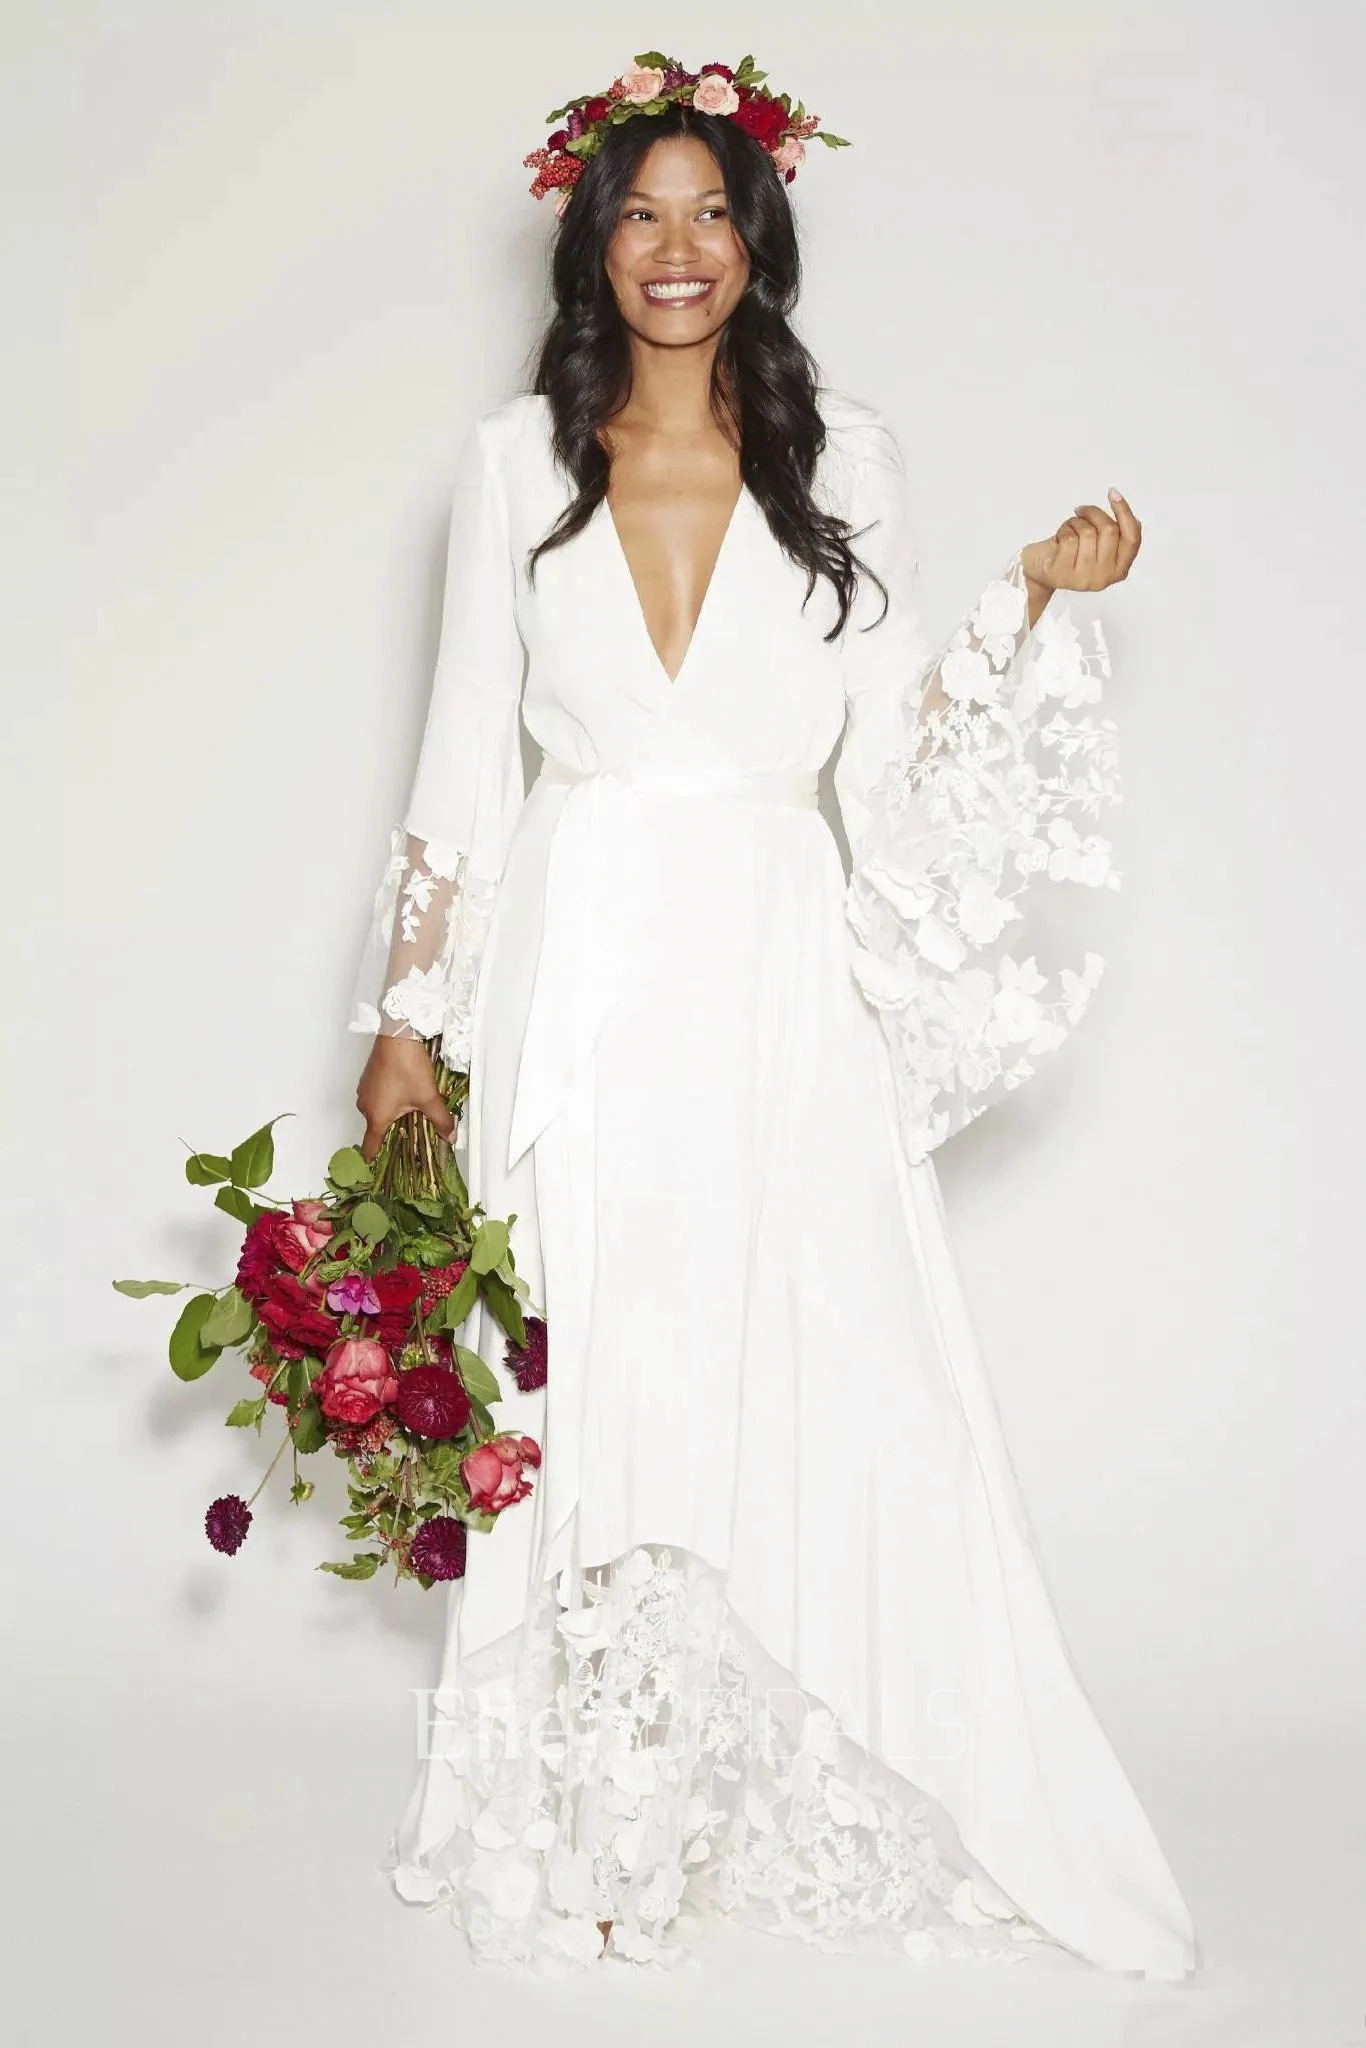 A-Line Plunging Neckline Long Sleeve Floor-length Chiffon/Lace Bohemian Wedding Dress with Draping and Lace